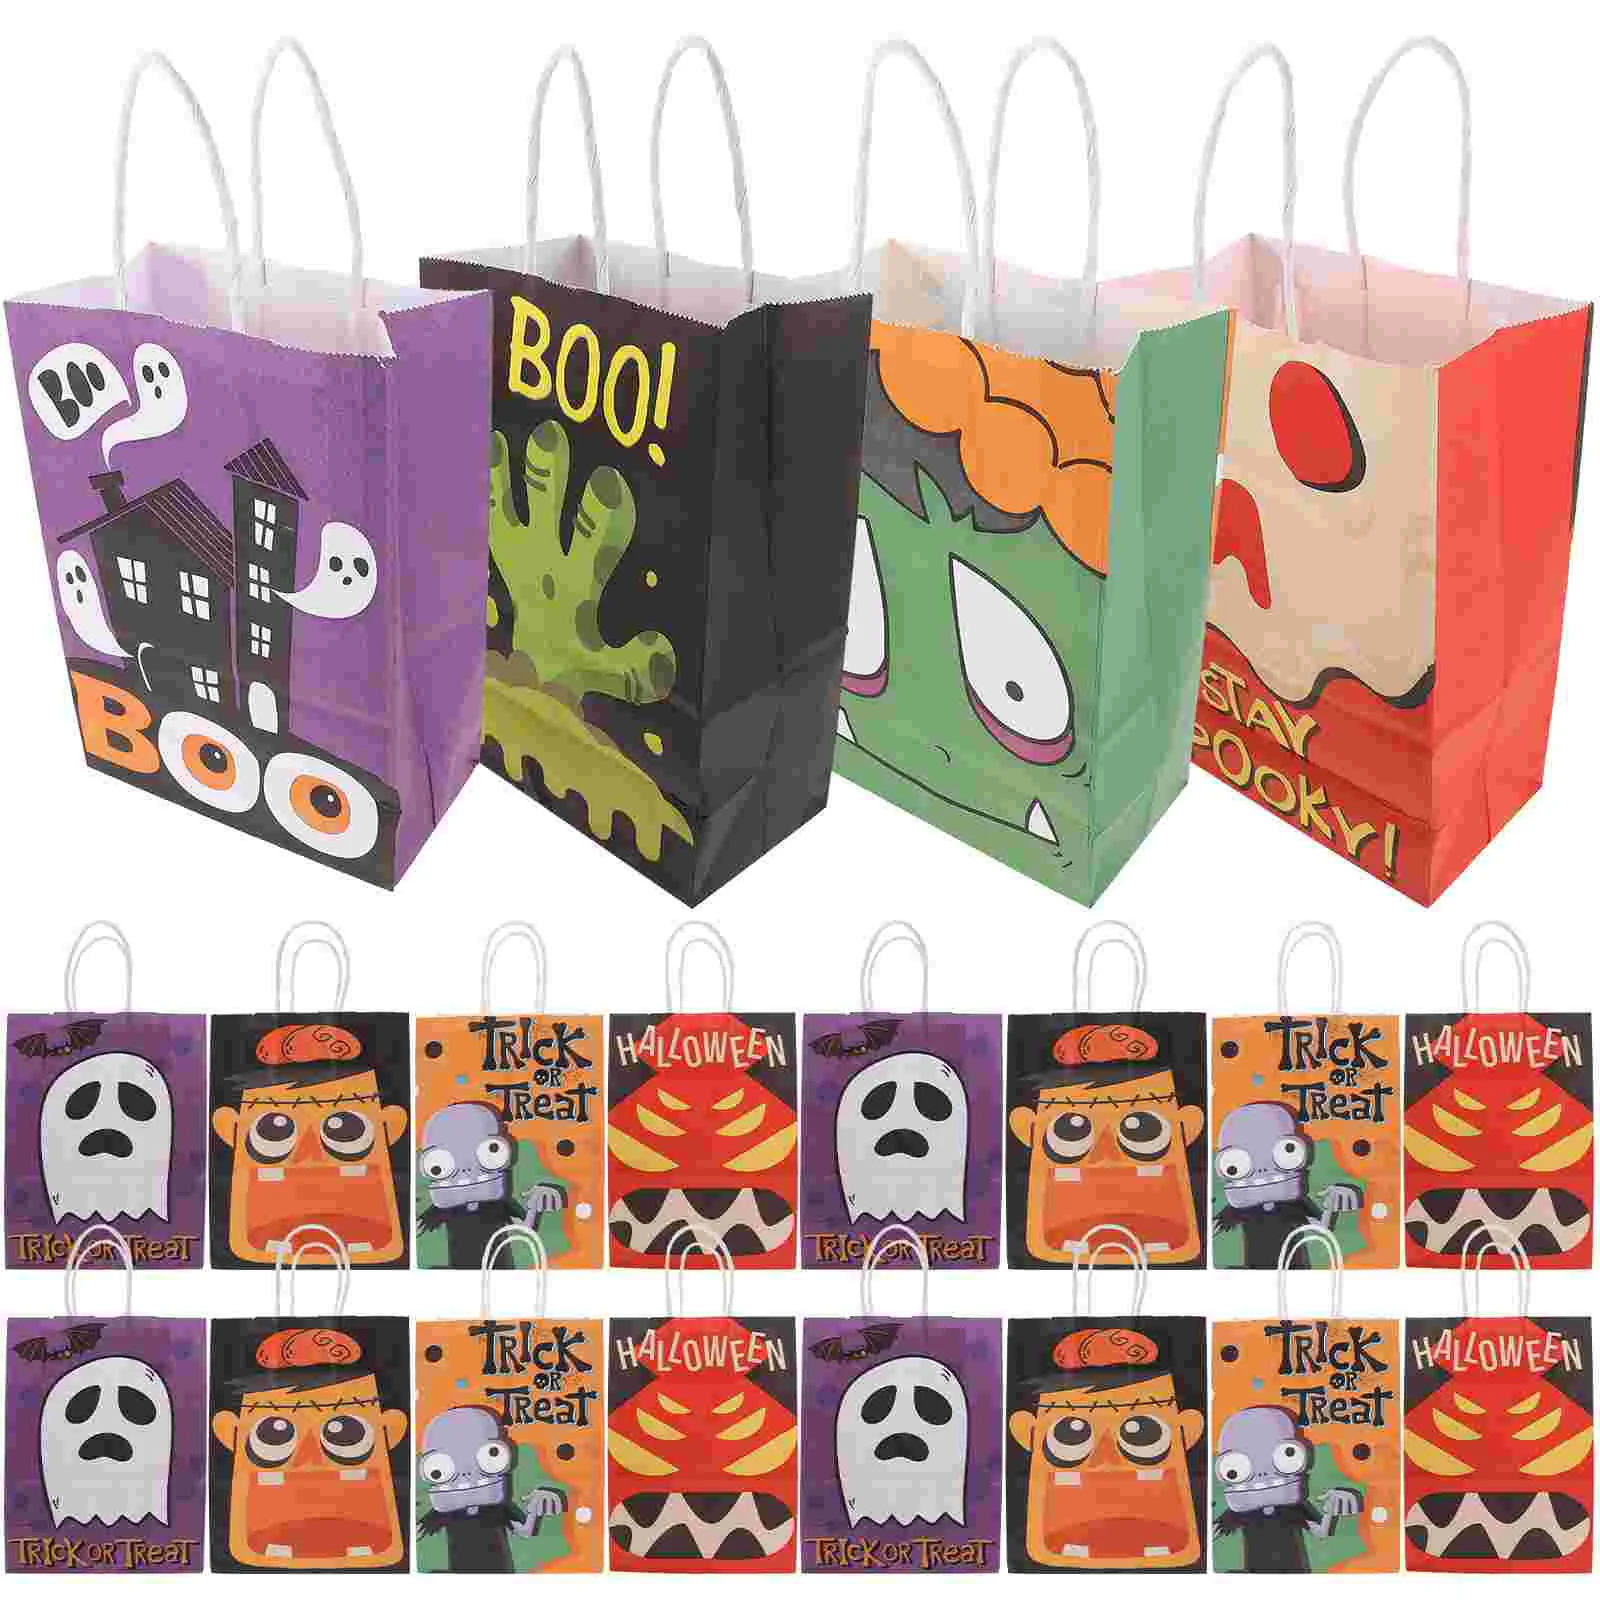 

24 Pcs Halloween Candy Bags Party Goodie Trick Treating Favor Pouch Small Gifts